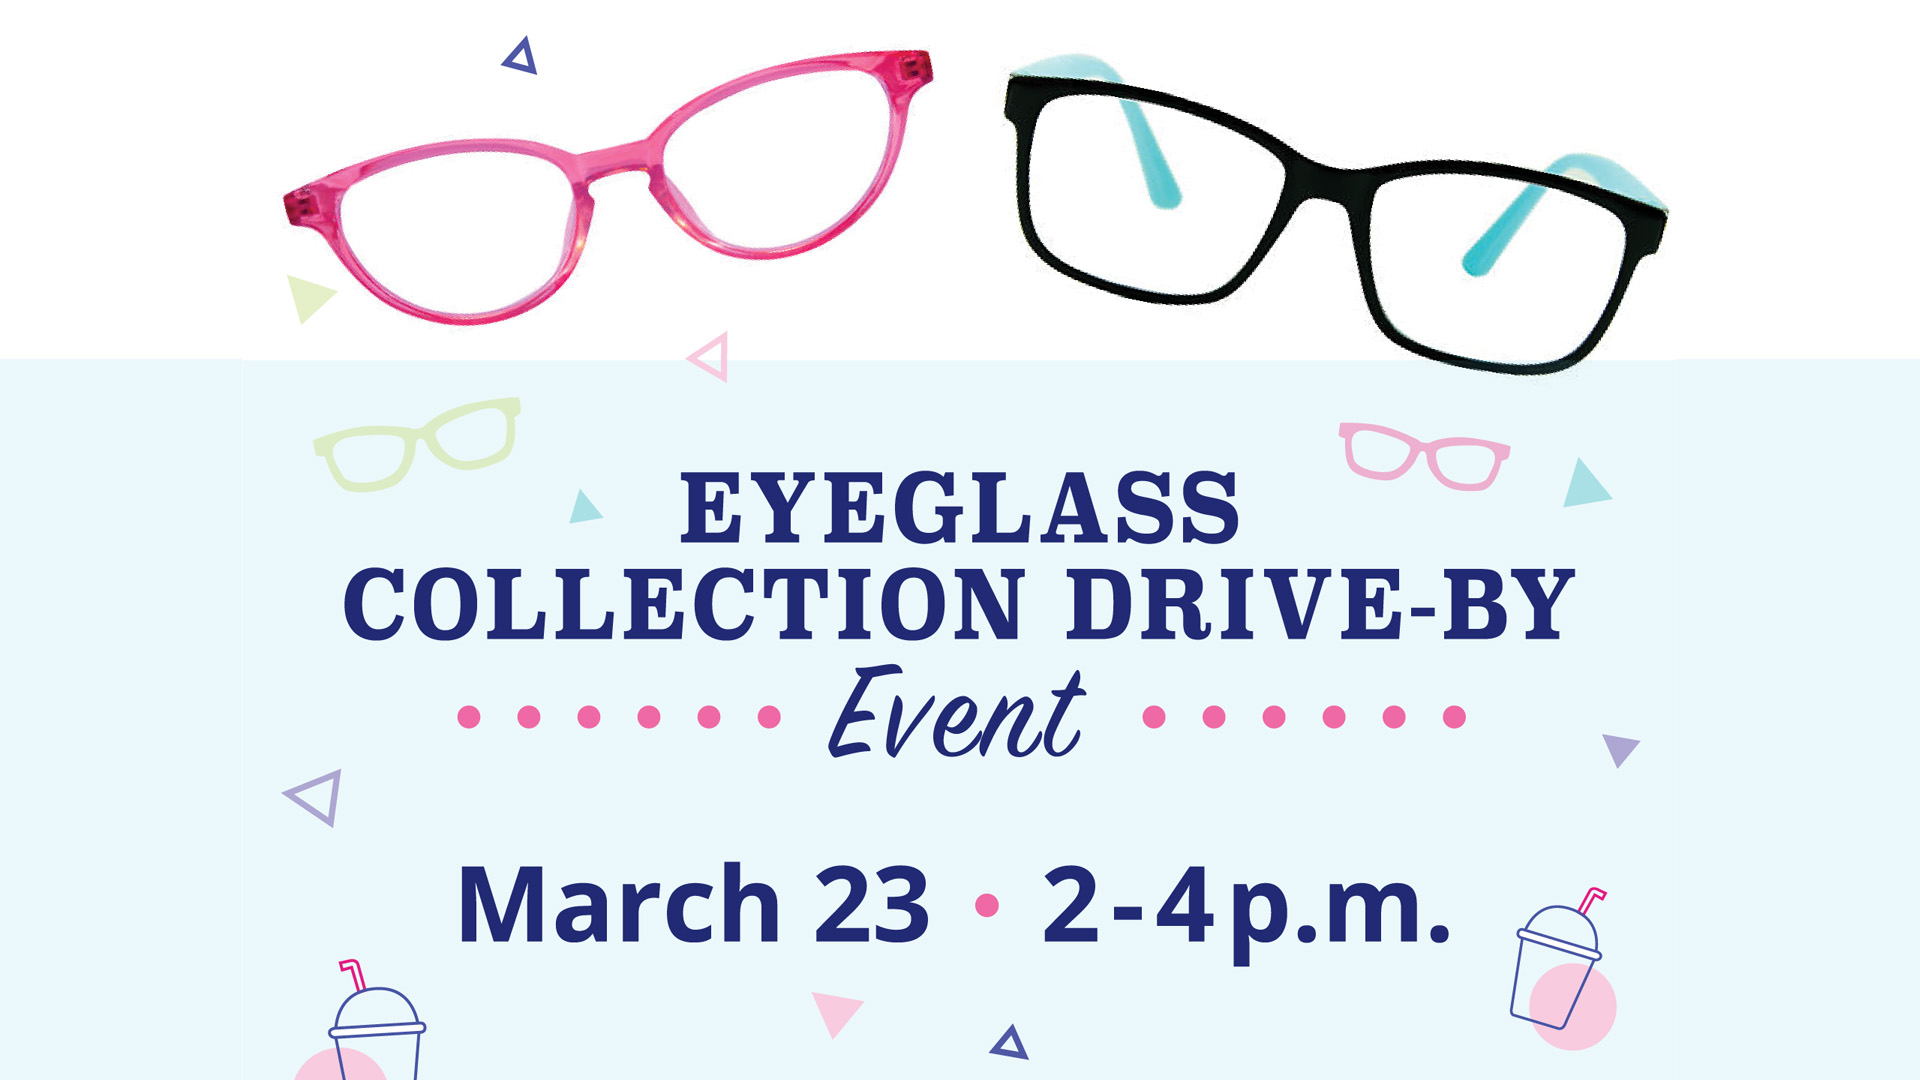 North Central Community Hospice Eyeglass Collection Drive By Event